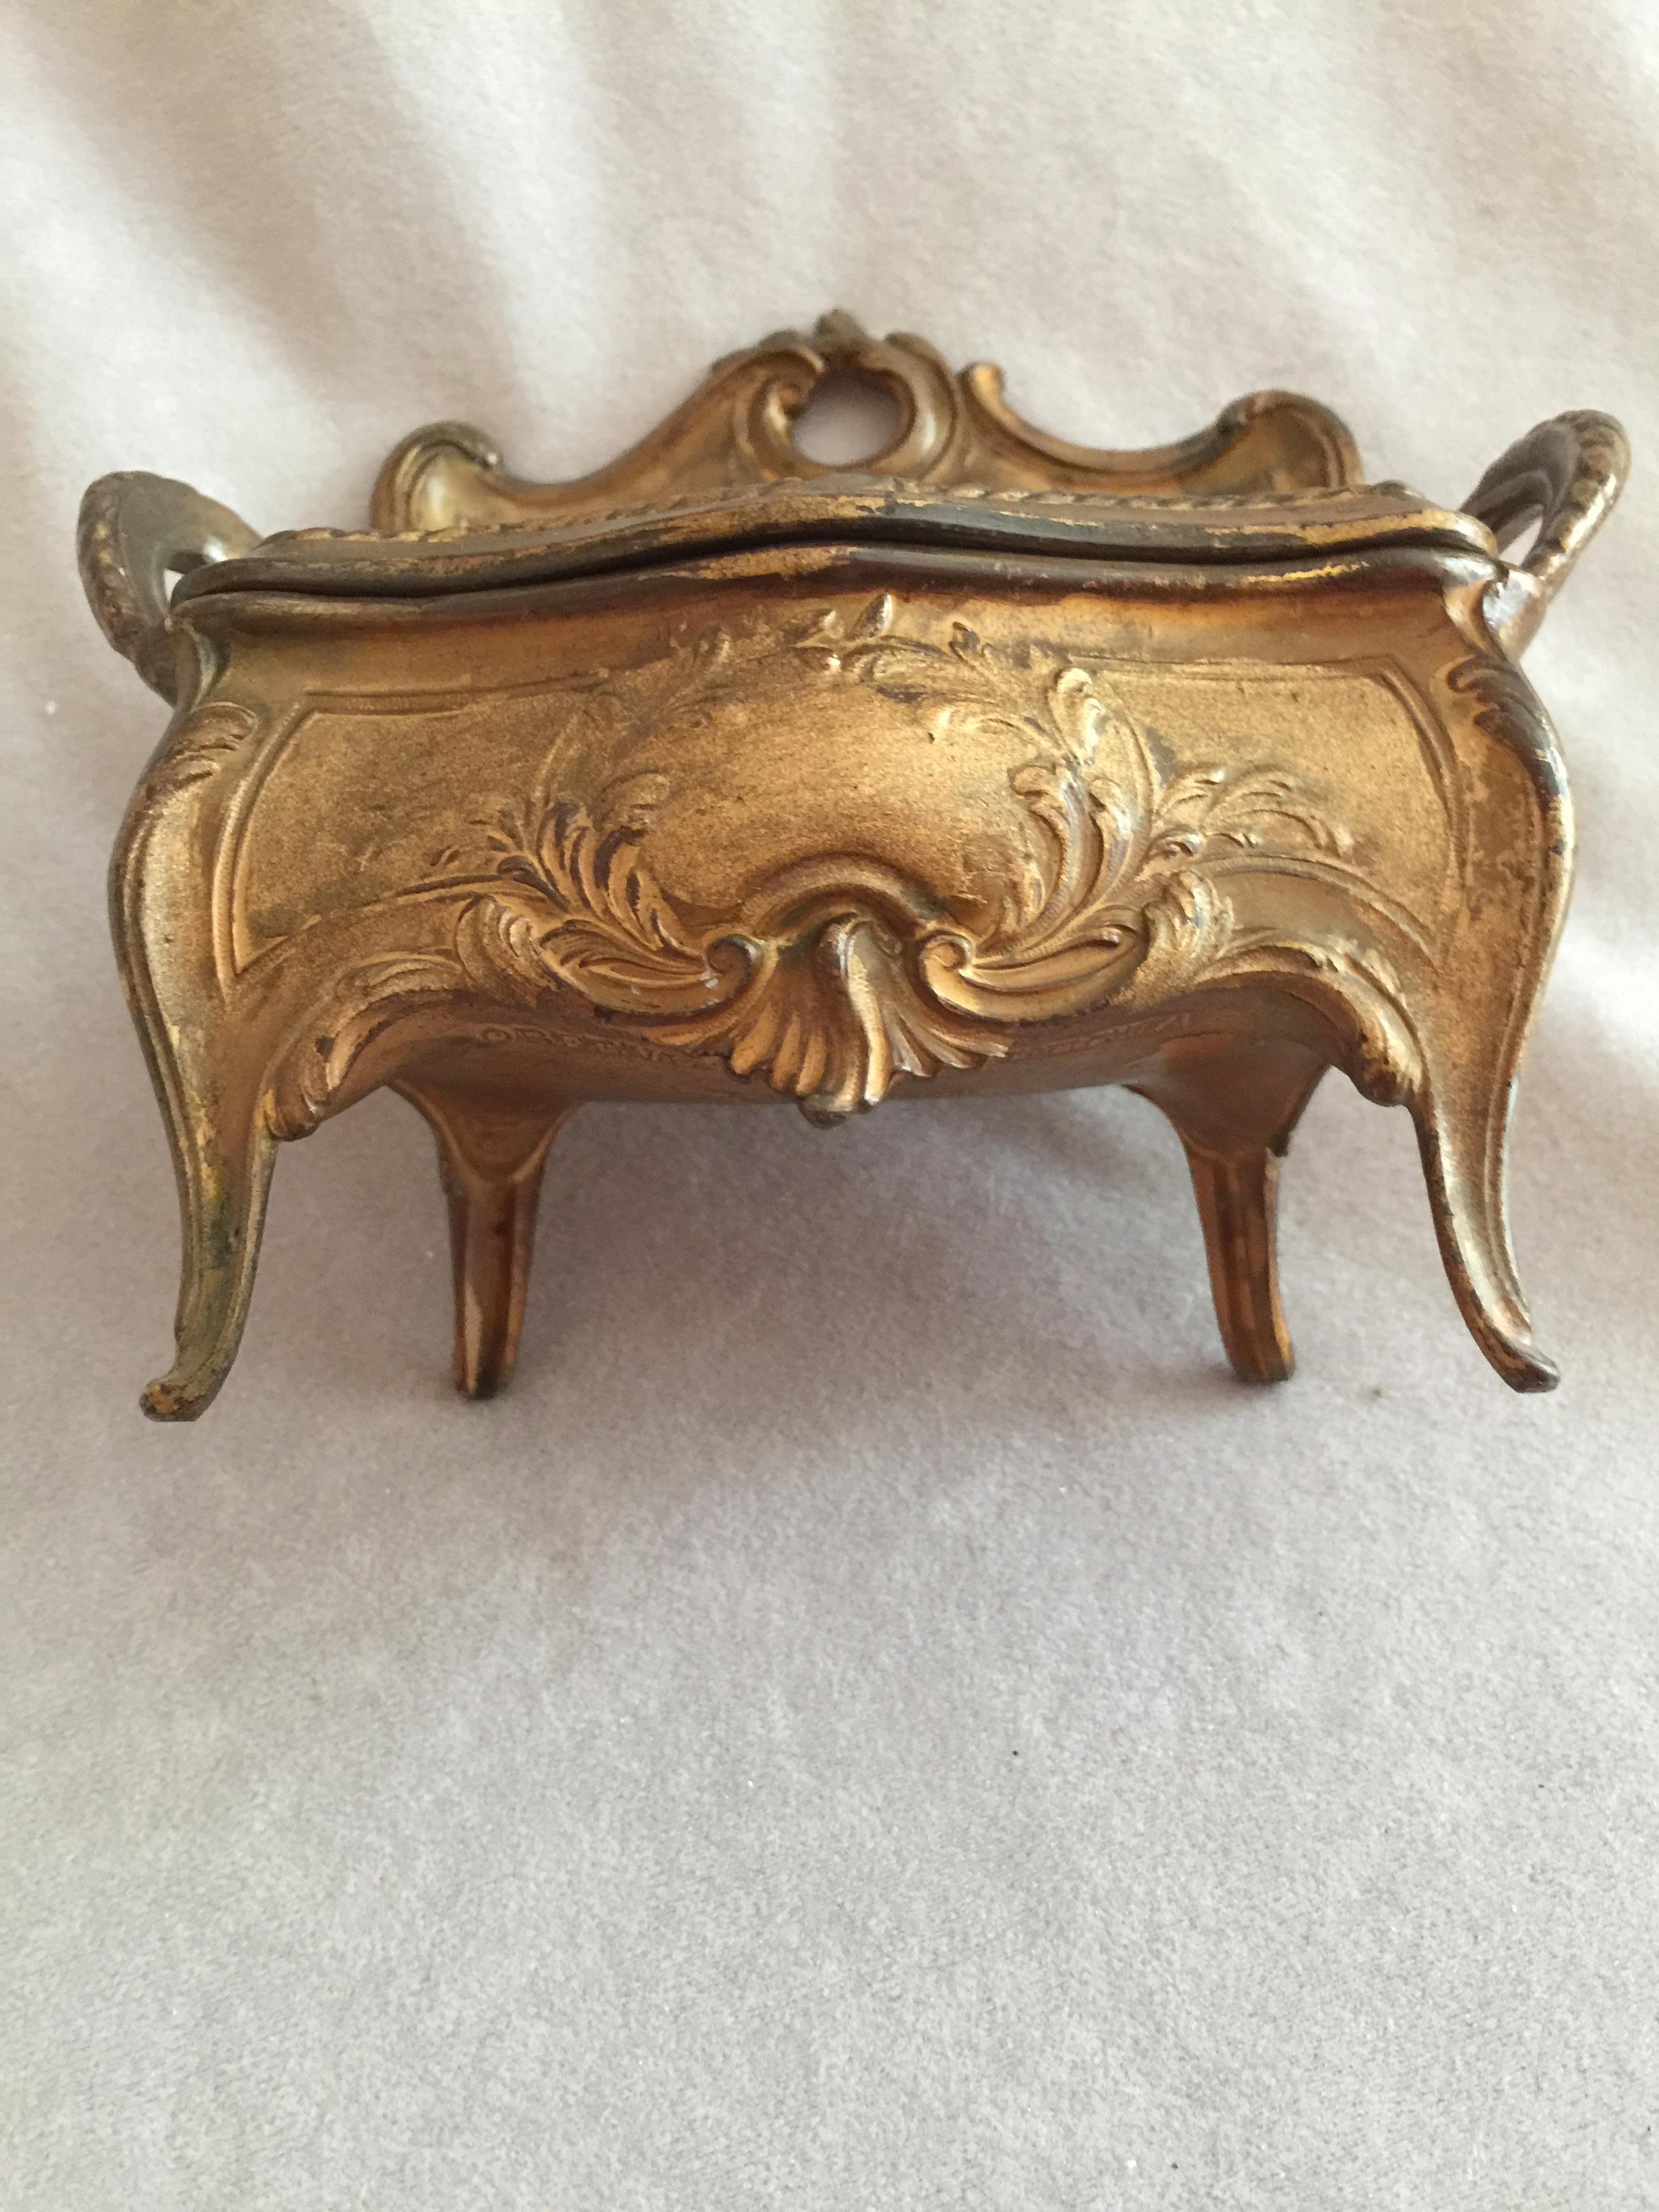 Rococo Revival Unusual French Antique Mini Jewelry Box in the Form of a Loveseat, Gilt Metal